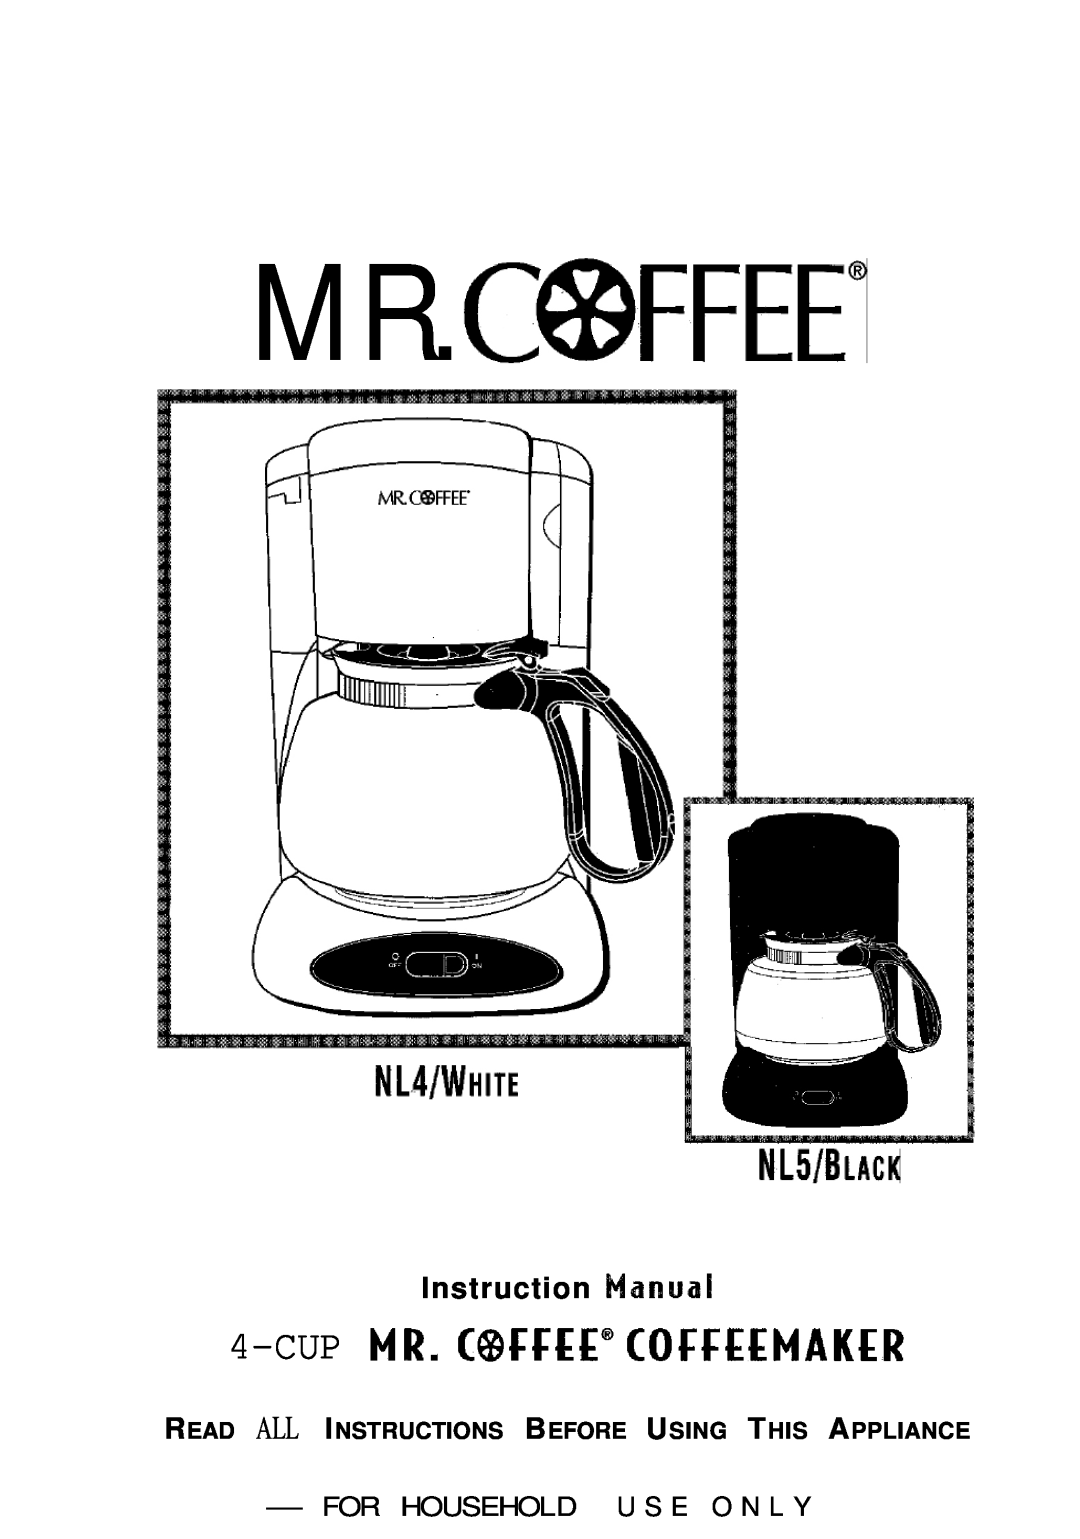 Mr. Coffee NL4 White manual CUPMR.C@ffEECOffEEMAKER, NL~/BLAcK, Mr.Ccbffee@, Instruction, For Household Use Only 